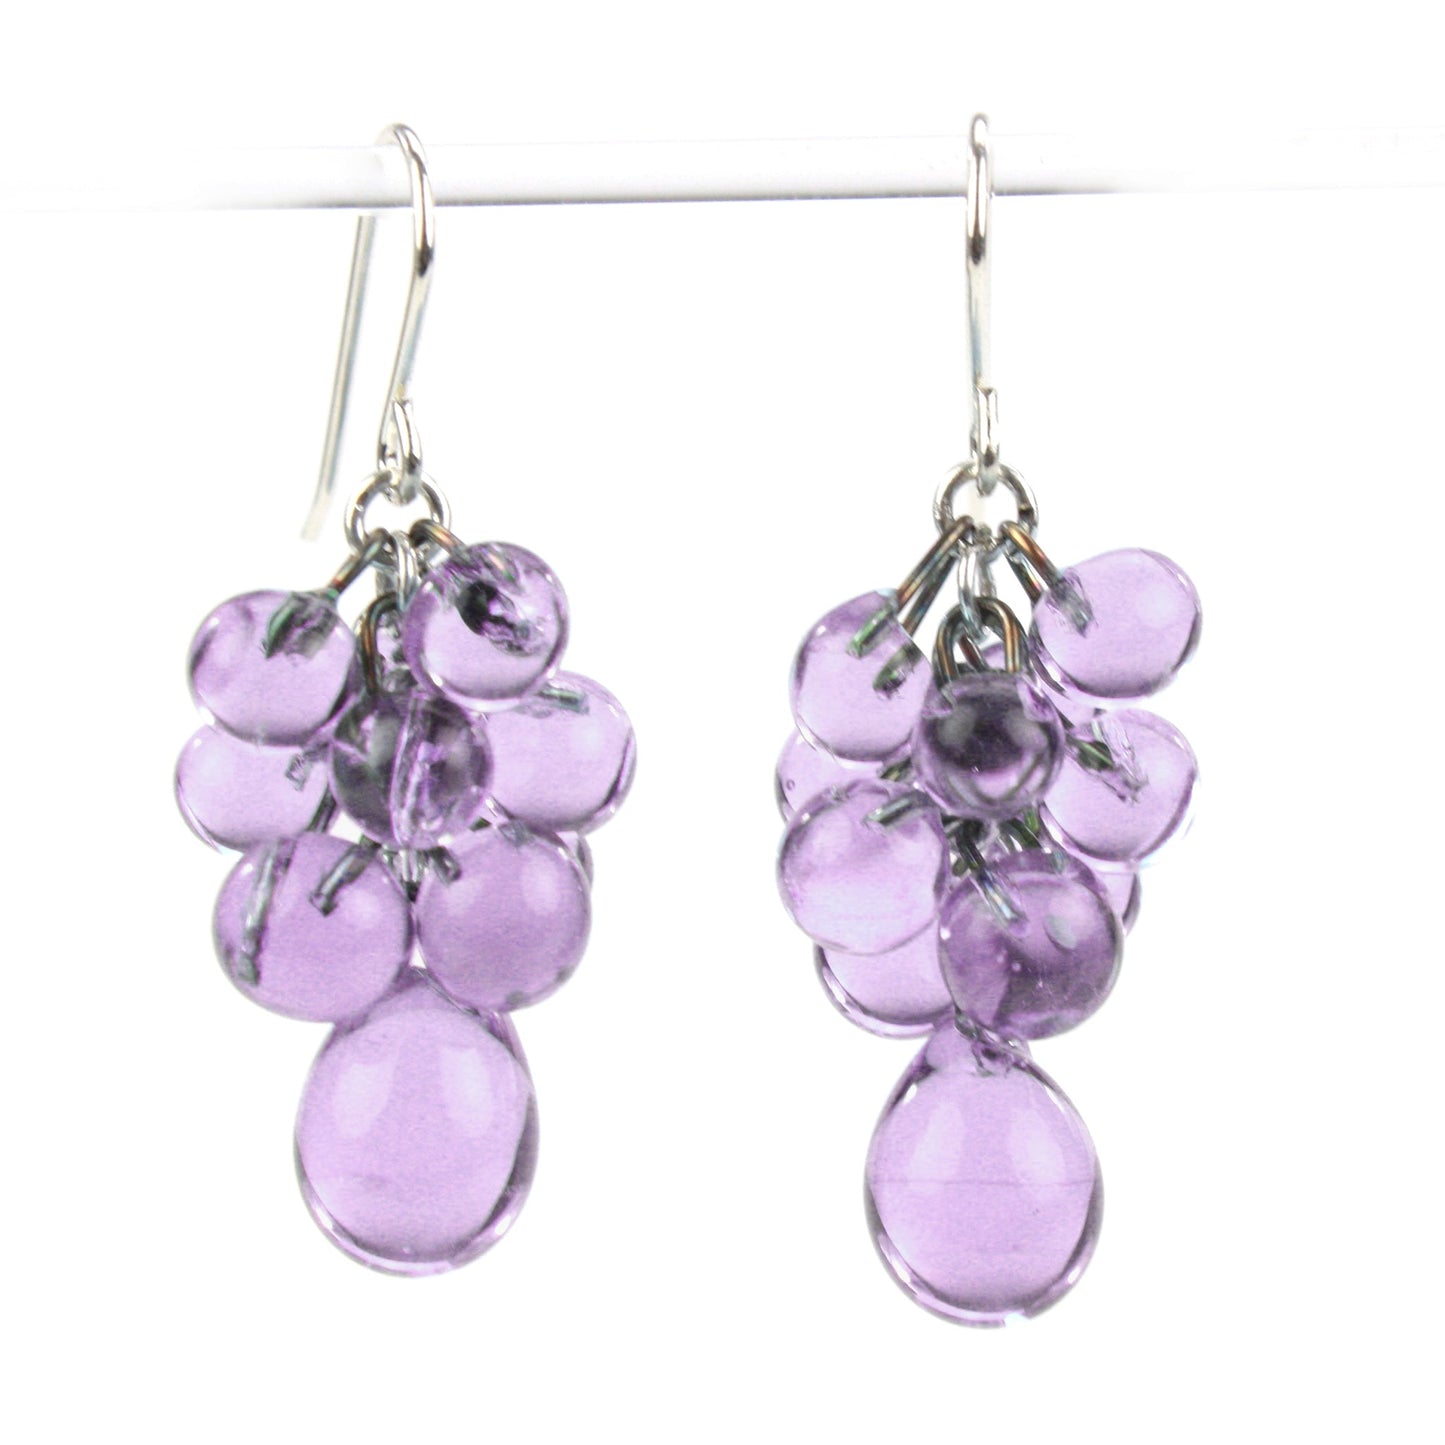 Chroma Earrings in Purple/Blue - Color Changing